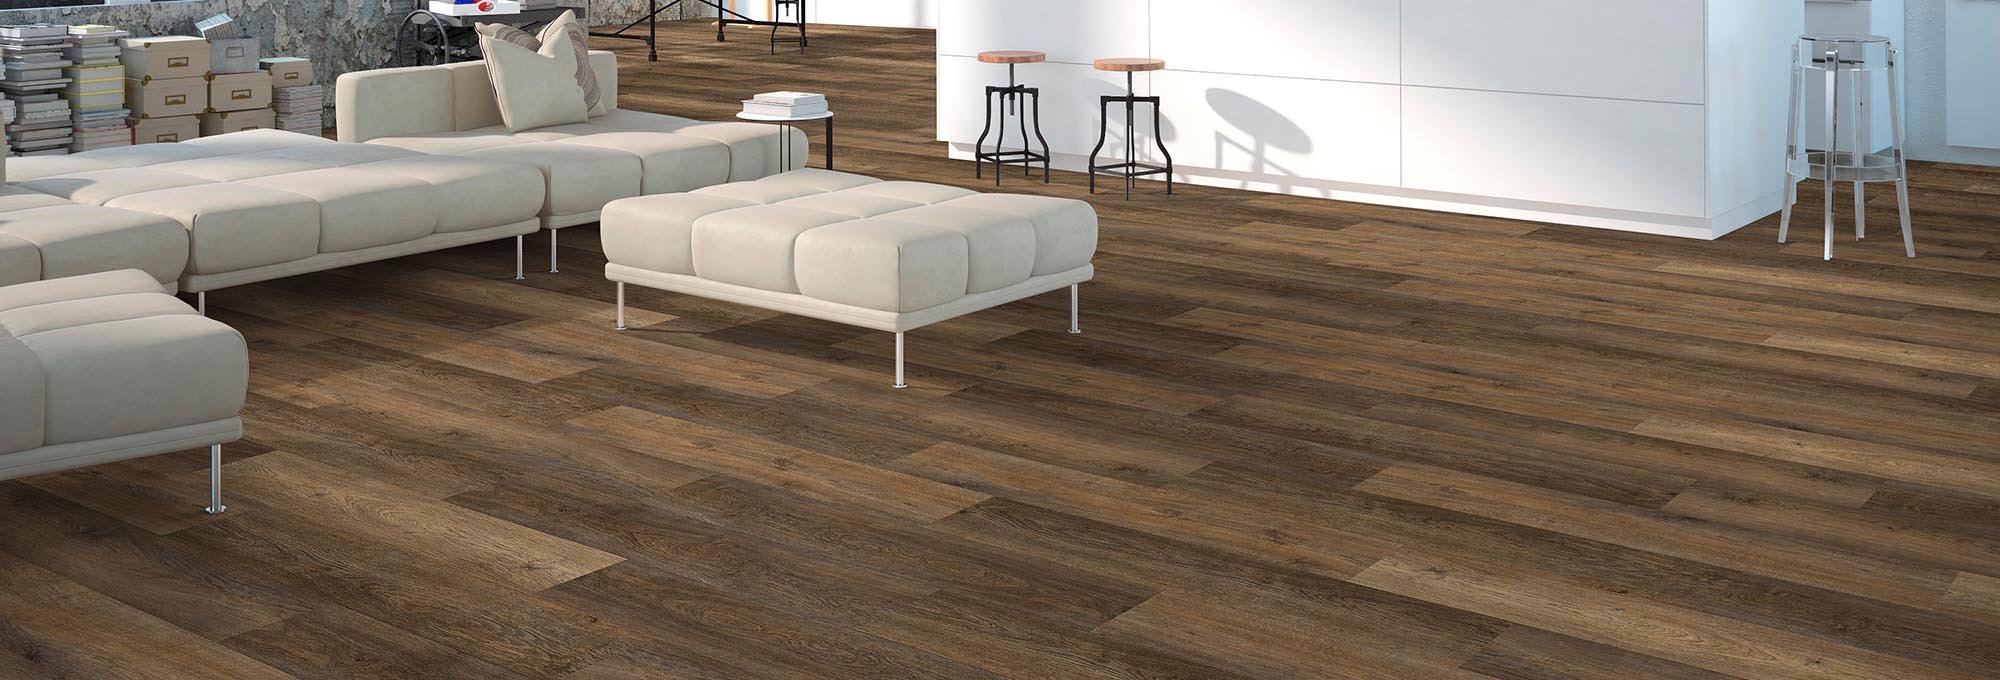 Shop Flooring Products from  Gilbert's CarpetsPlus COLORTILE in Big Rapids, MI